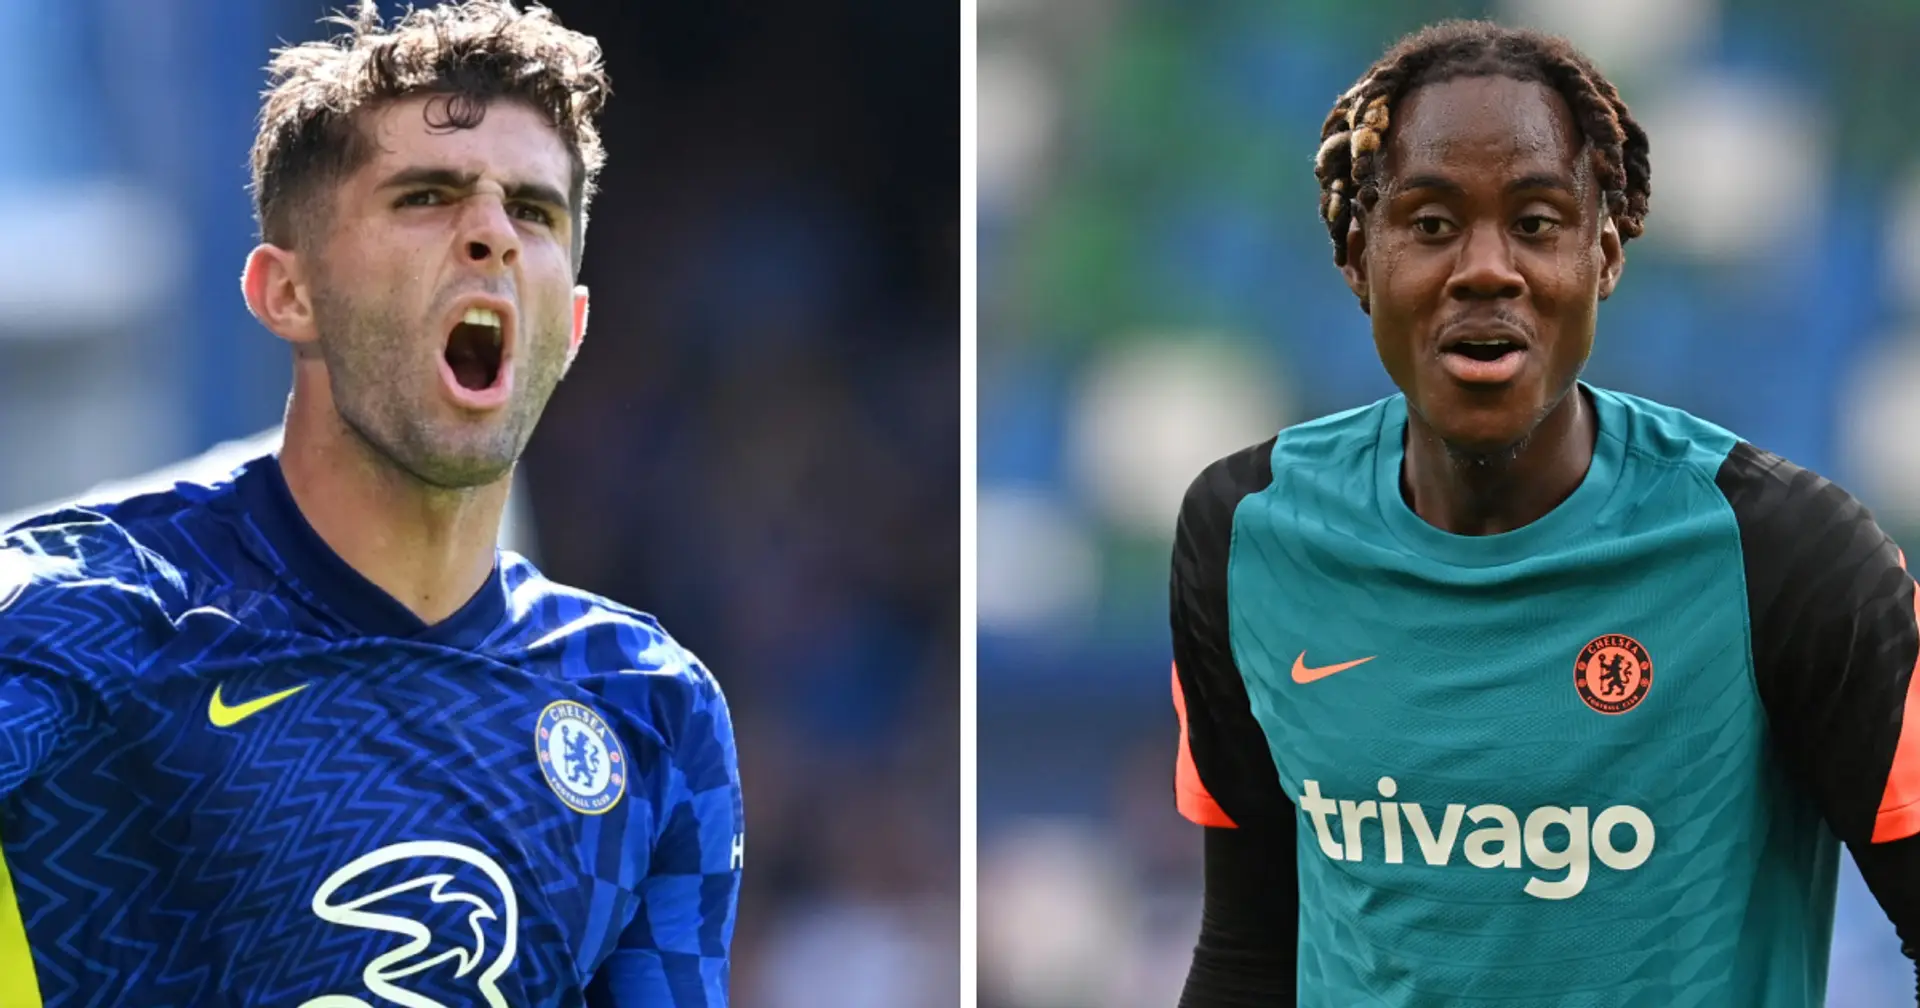 Tuchel confirms Chalobah stay & 3 other big Chelsea stories you could have missed